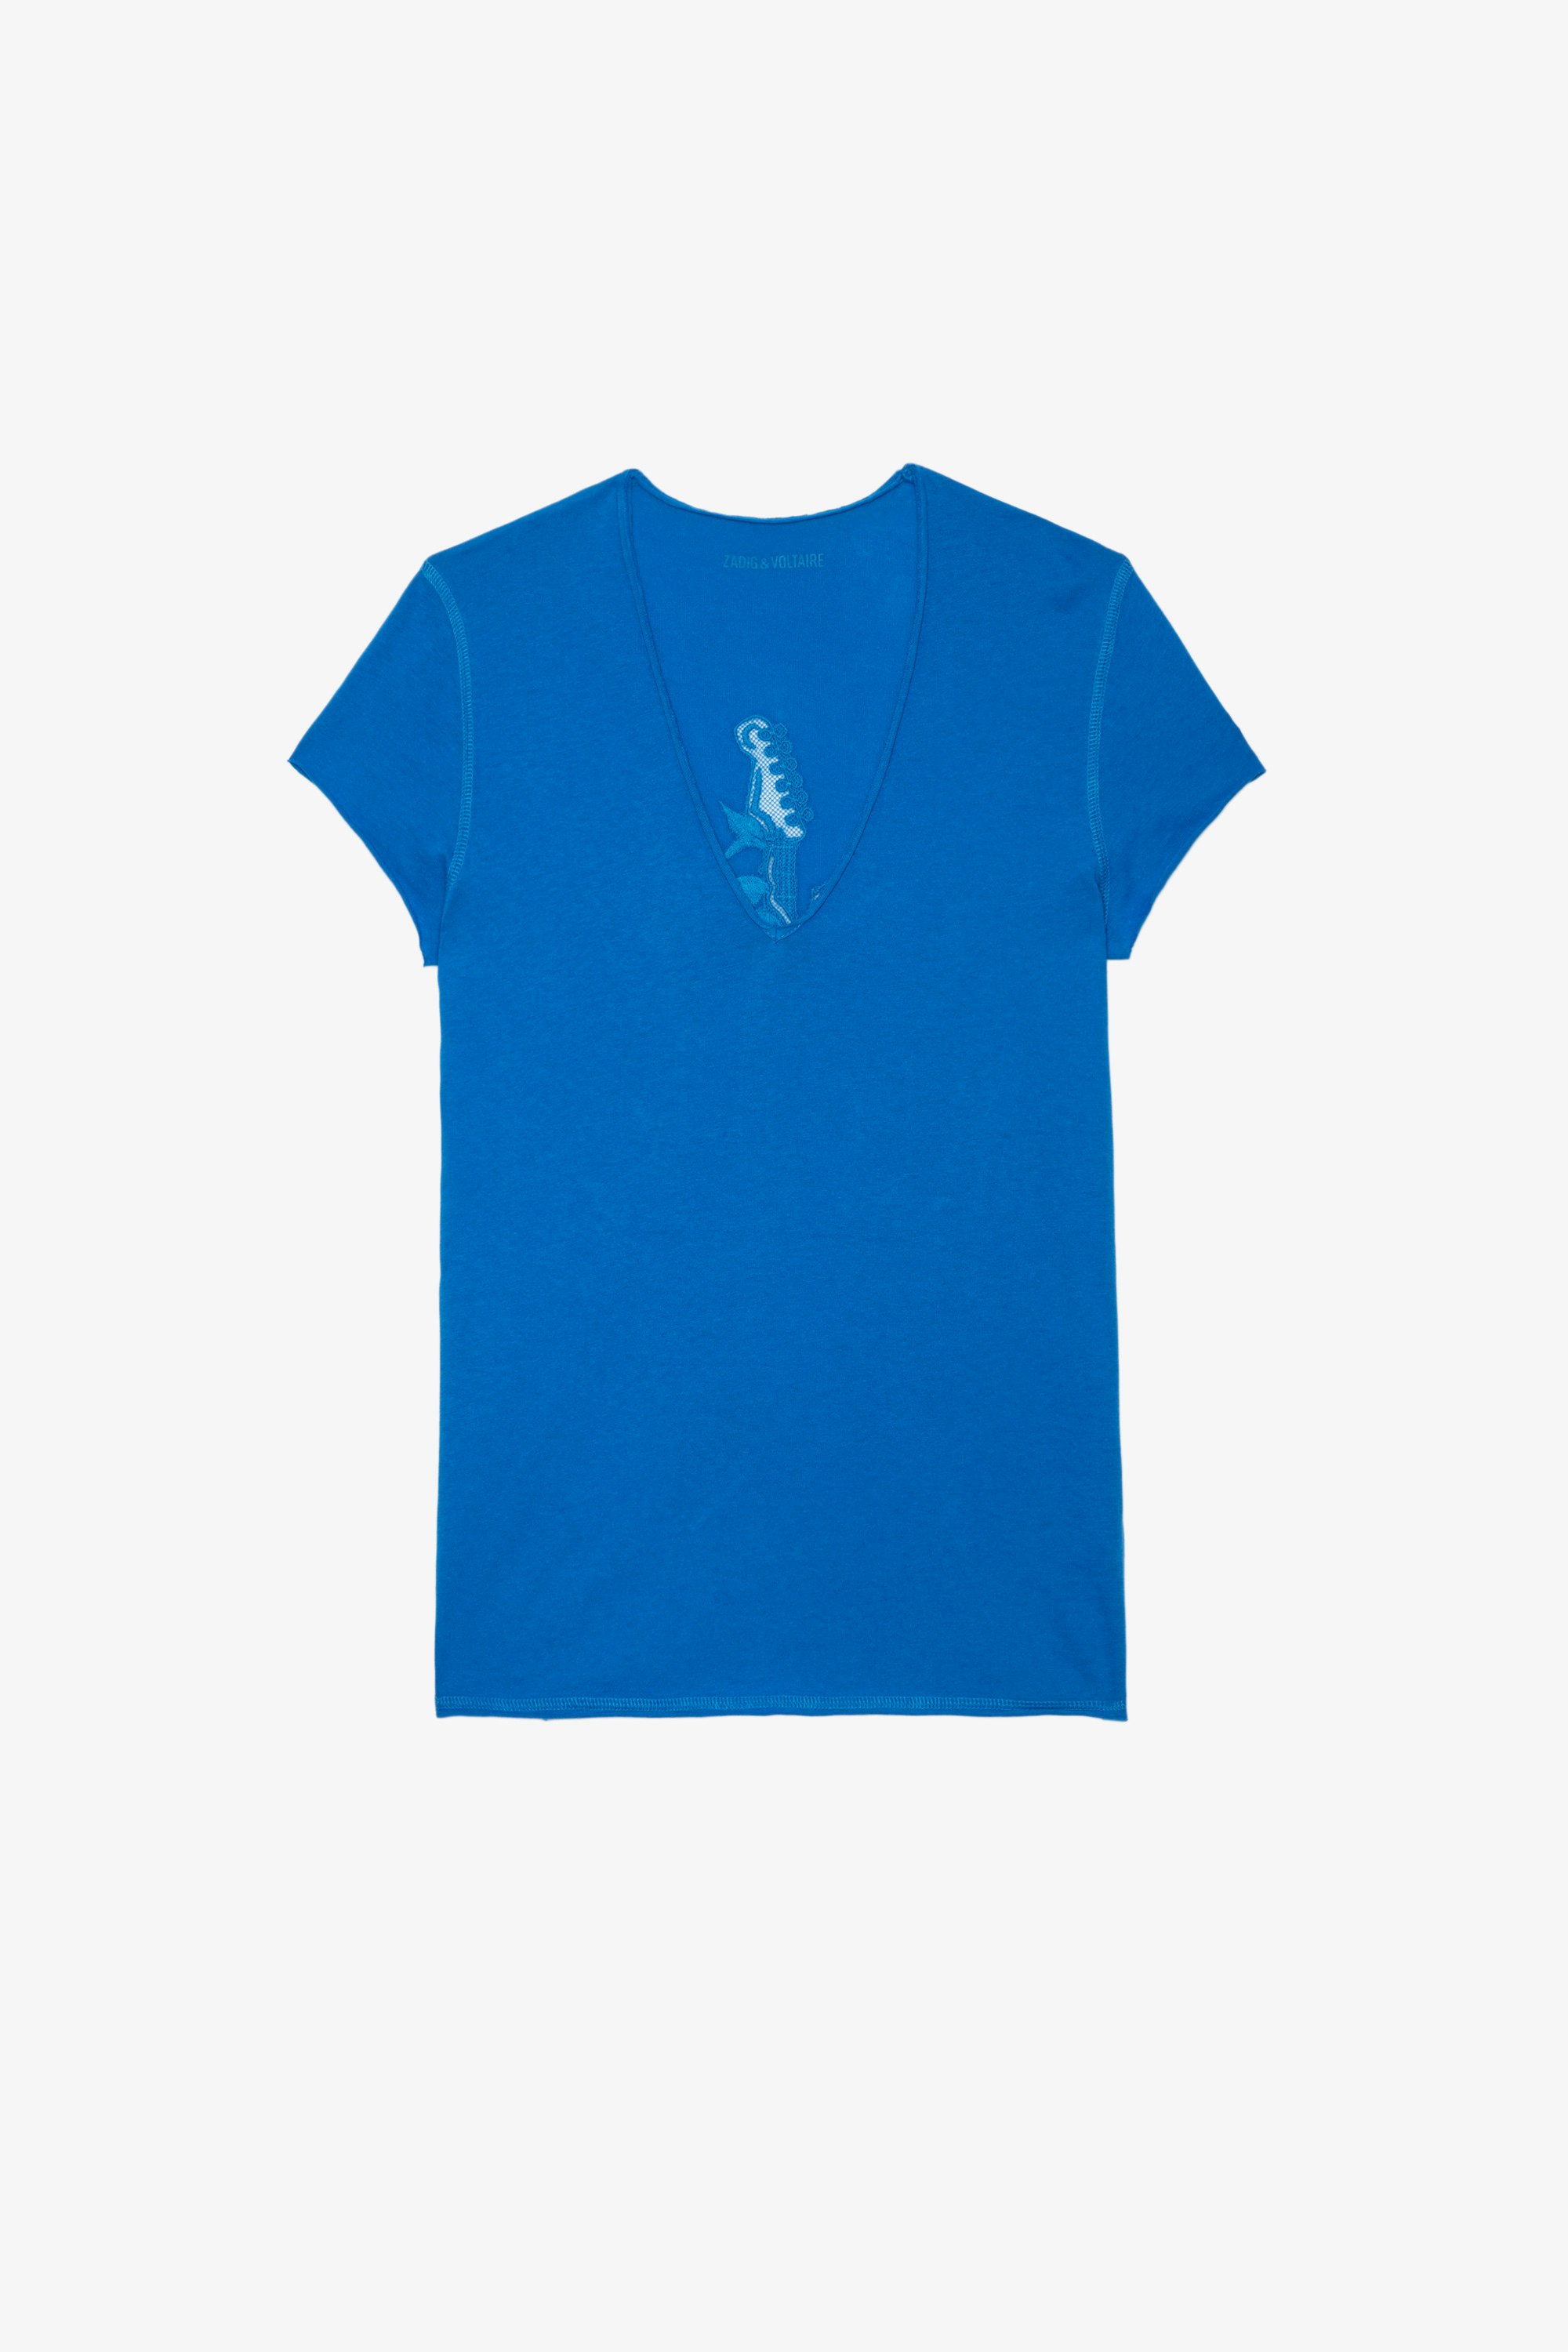 Guitar Mesh Story T-Shirt Women’s blue cotton T-shirt with a V neckline and short sleeves and featuring a guitar motif on the back